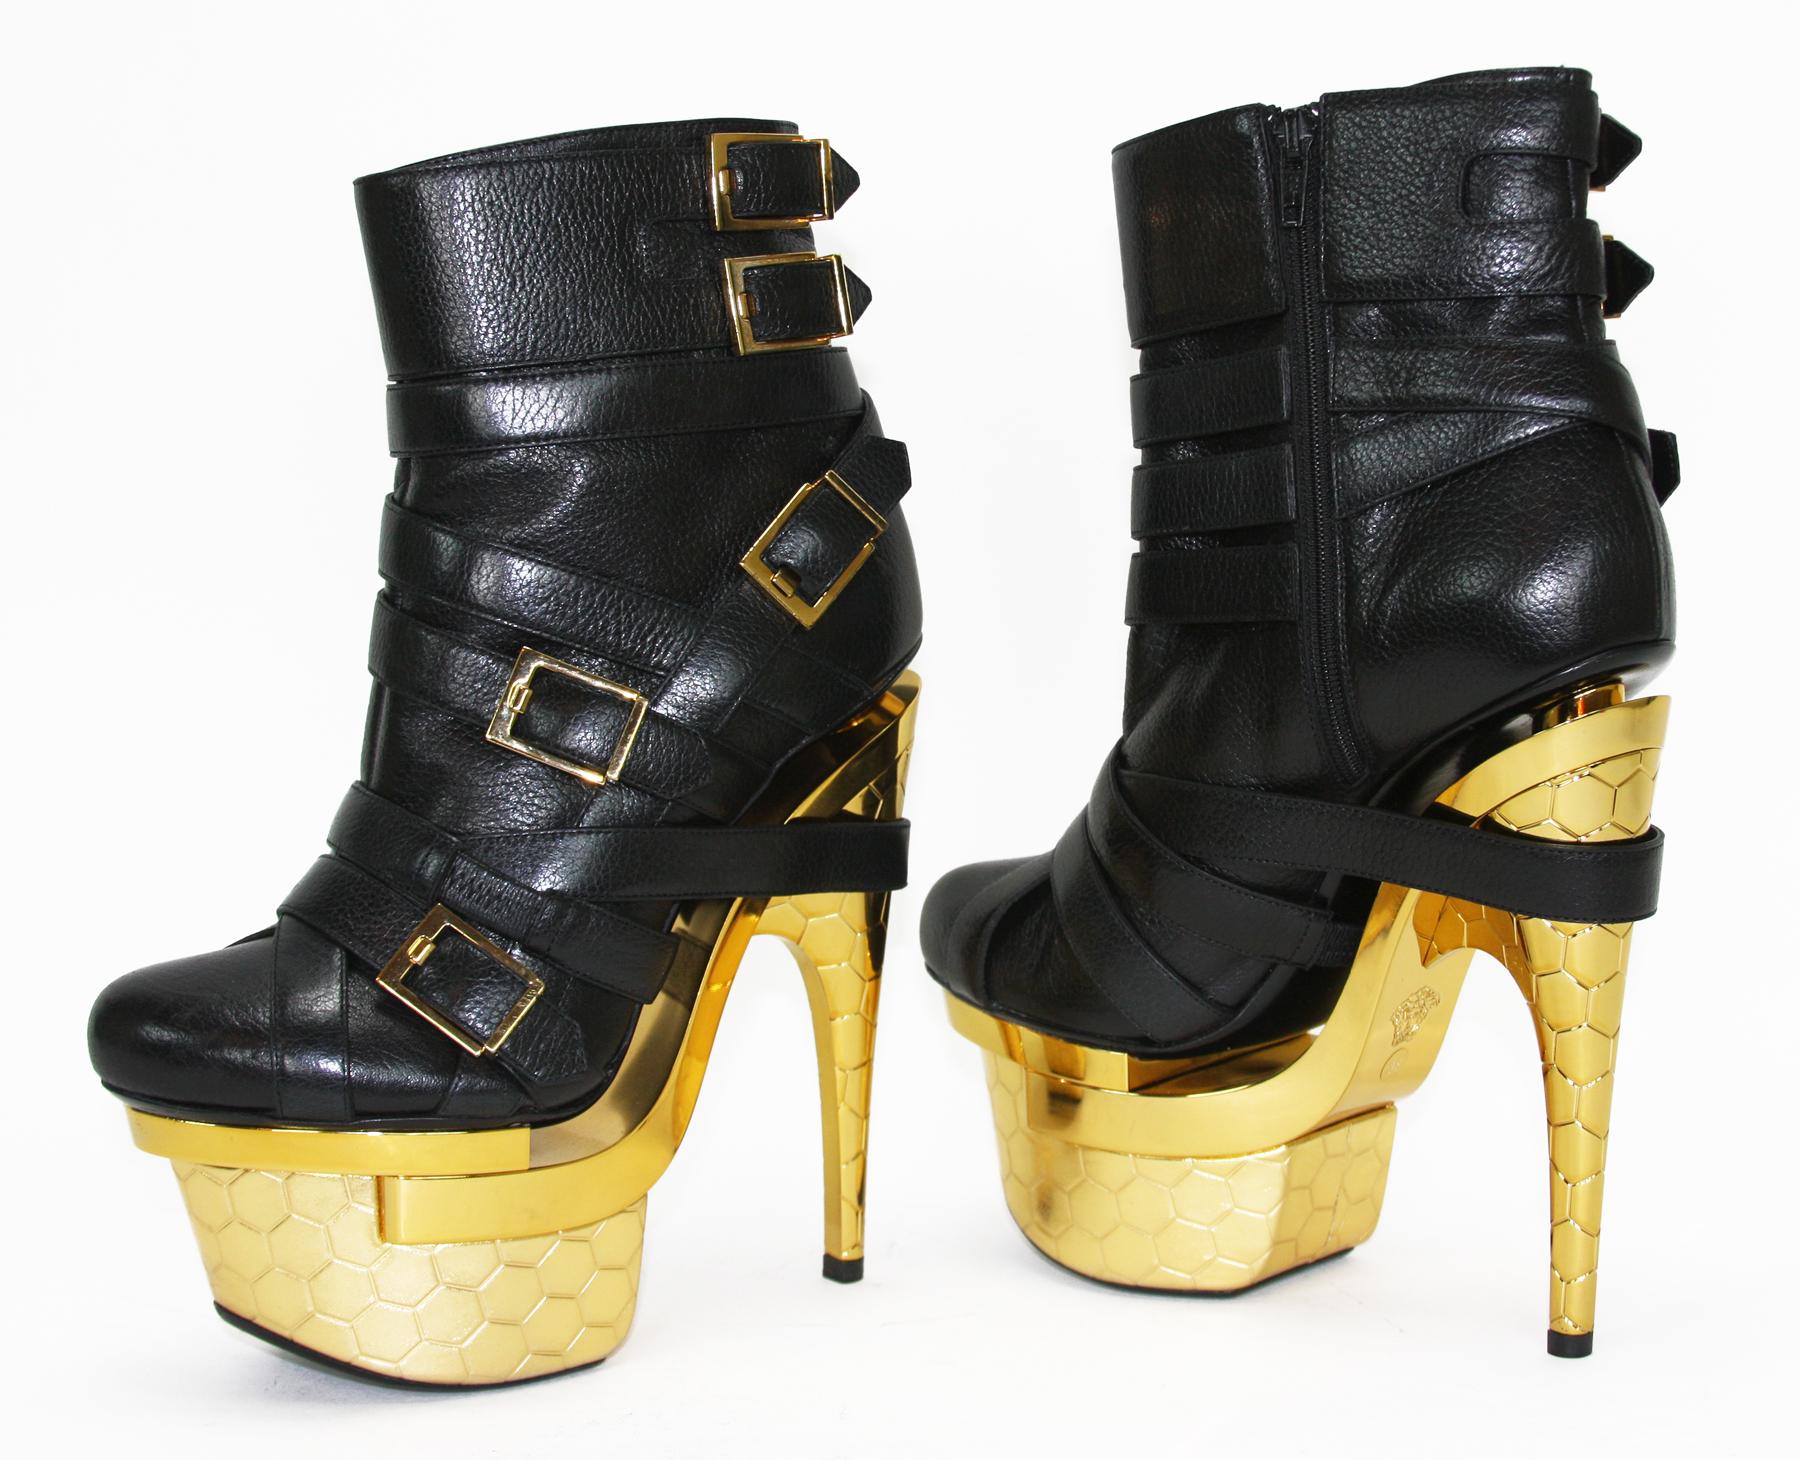 New Versace Multi Buckle Black Gold Ankle Boots Booties
Designer size 38 - US 8
100% Leather, Multi Gold Tone Metal Buckles, 3 x Gold Tone Platform with Honeycomb Design, Side Zip Closure, Leather Lining.
Heel Height Approx. - 6.5 inches (16.5 cm),